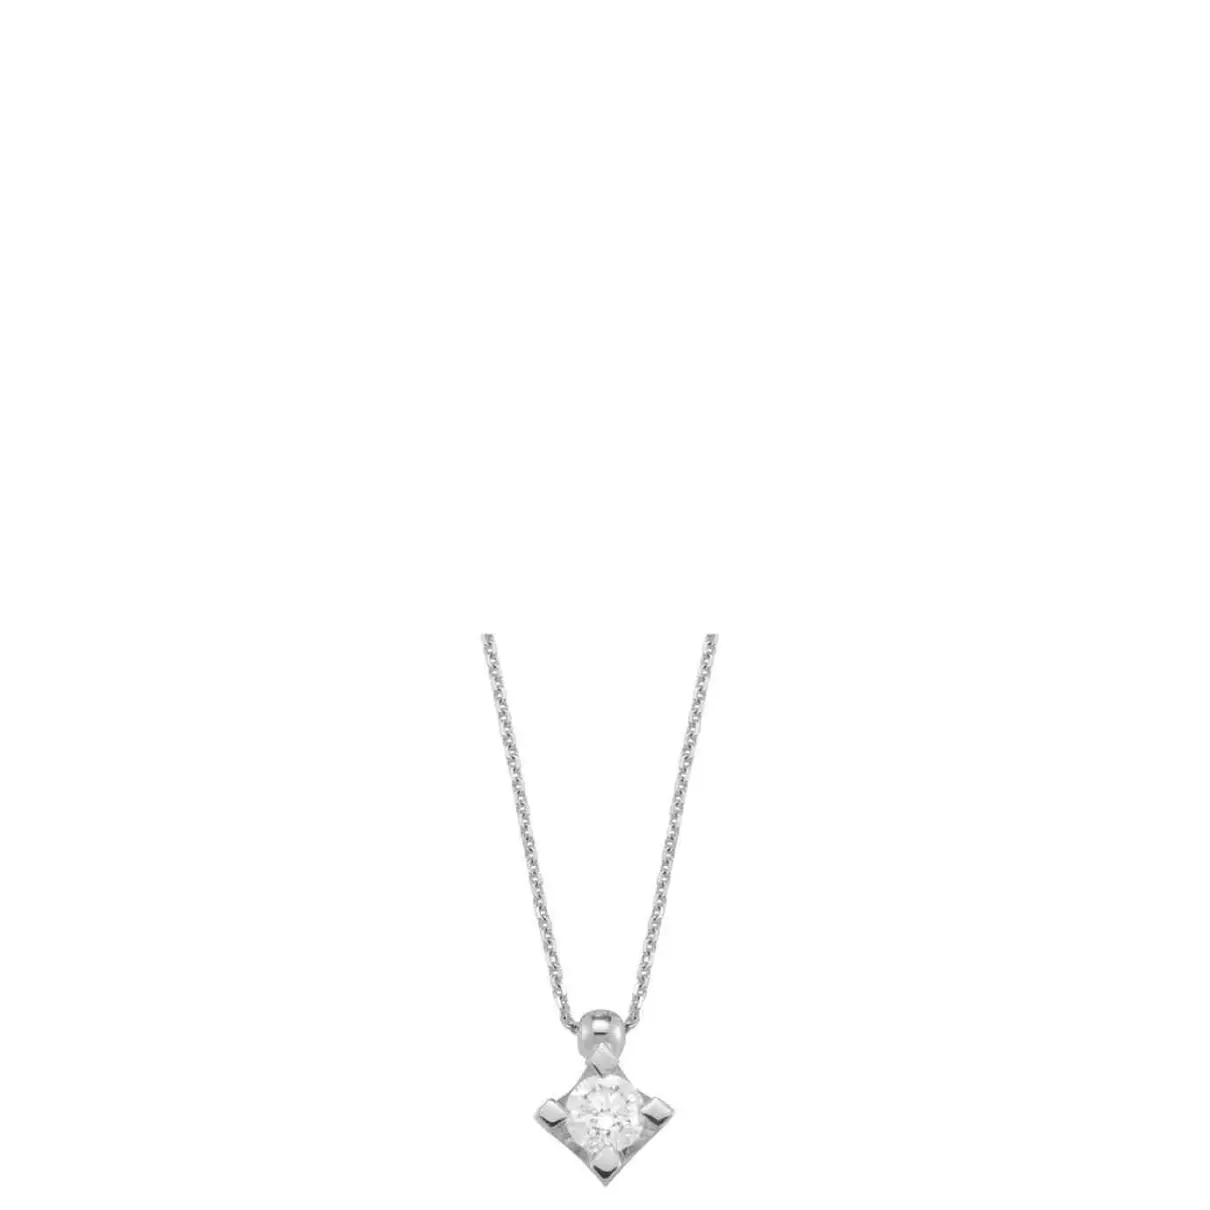 Buy Gold Belgium White gold necklace online